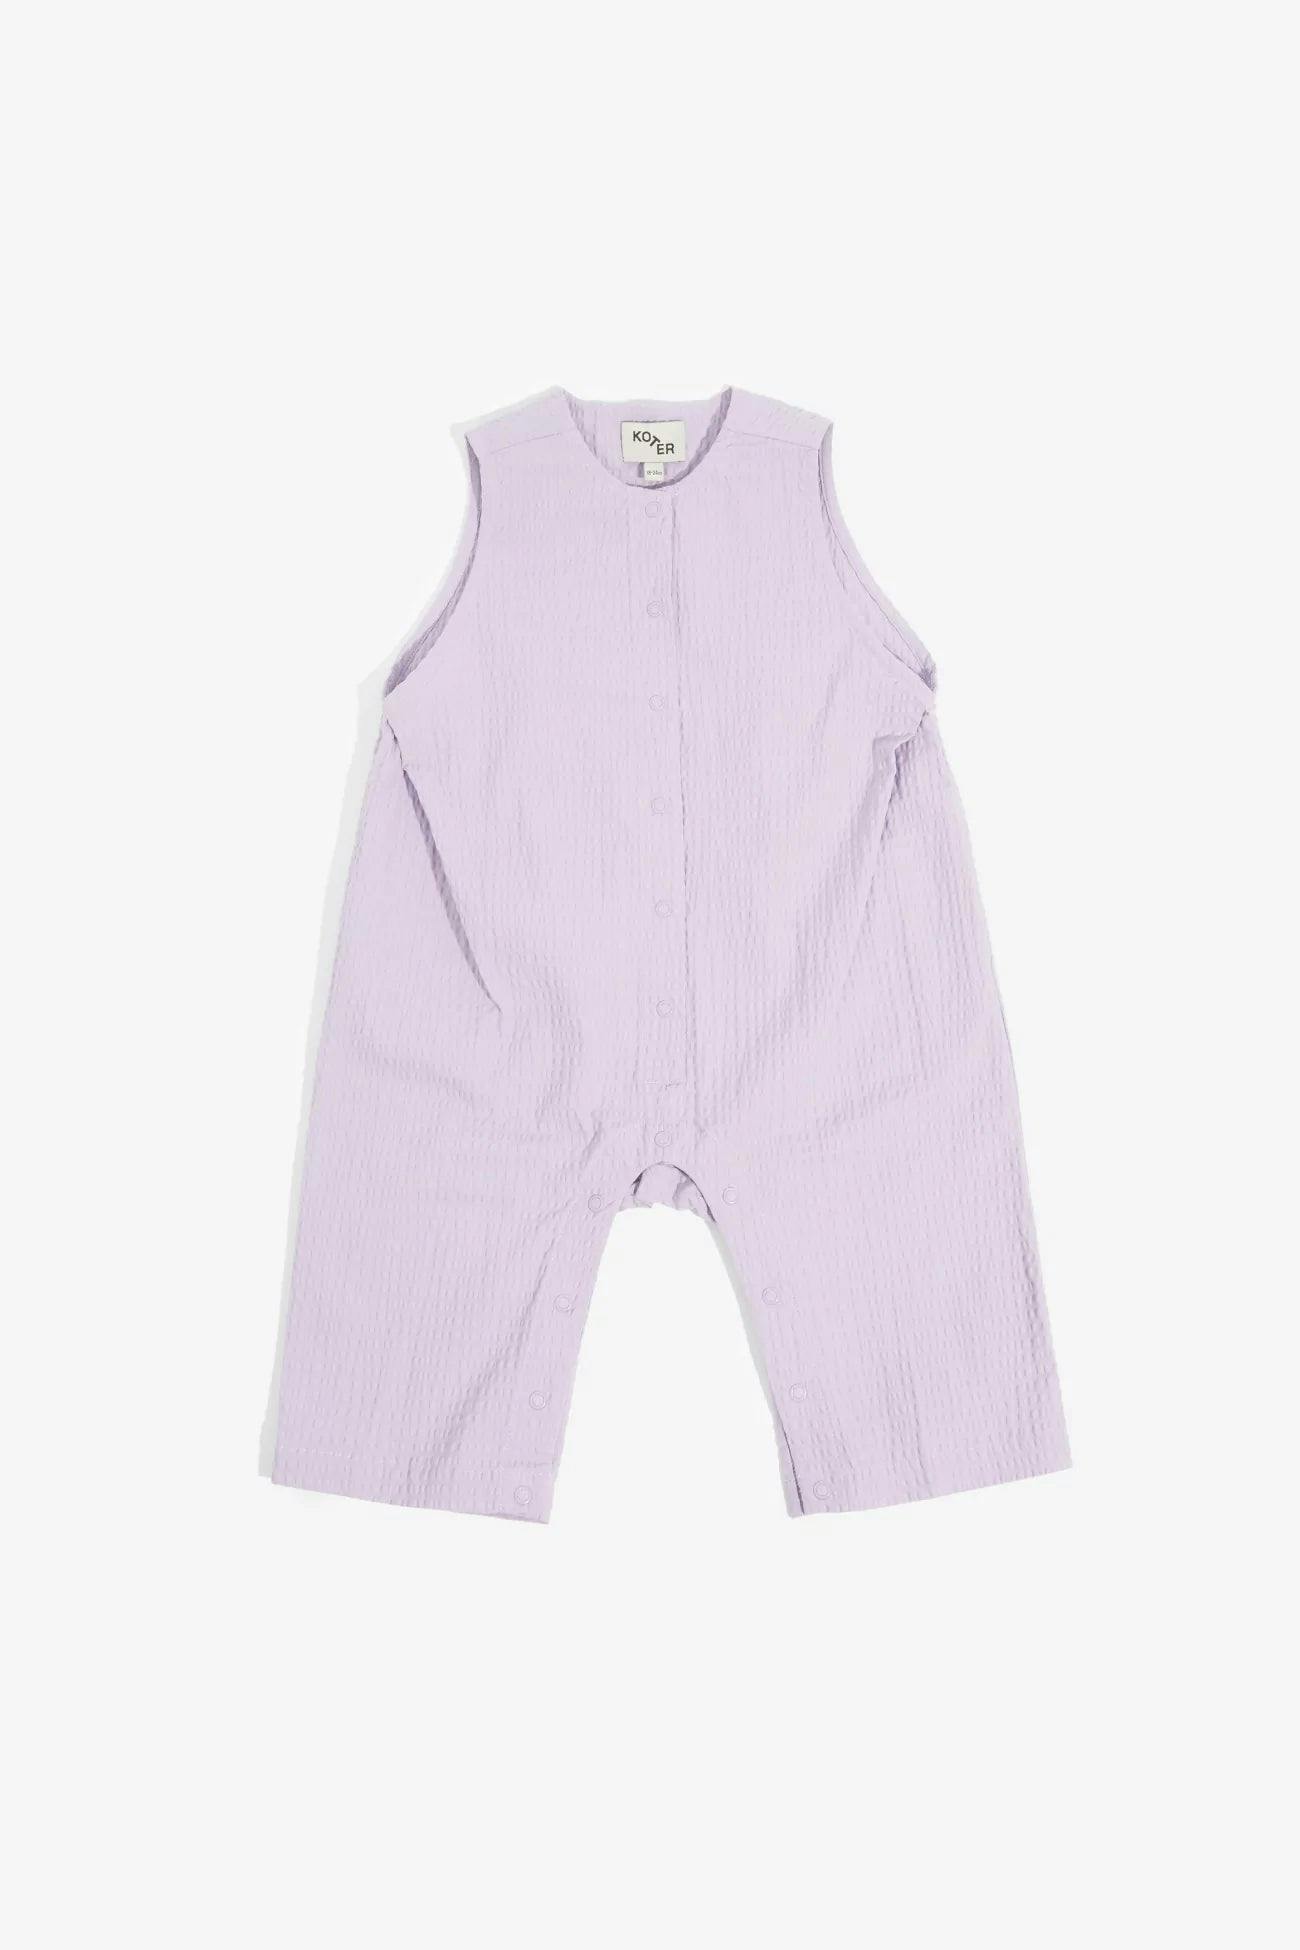 Playsuit in textured cotton, to wear on its own on warmer days or to layer with our Rory t-shirt. Yoke and curved seam-detail in back, subtle pleats to create a new volume. Poppers in front and under the legs for easy access. The perfect, unisex summer playsuit.97% organic cotton 3% elastane (lilac seersucker)99% organic cotton 1% elastane (black)